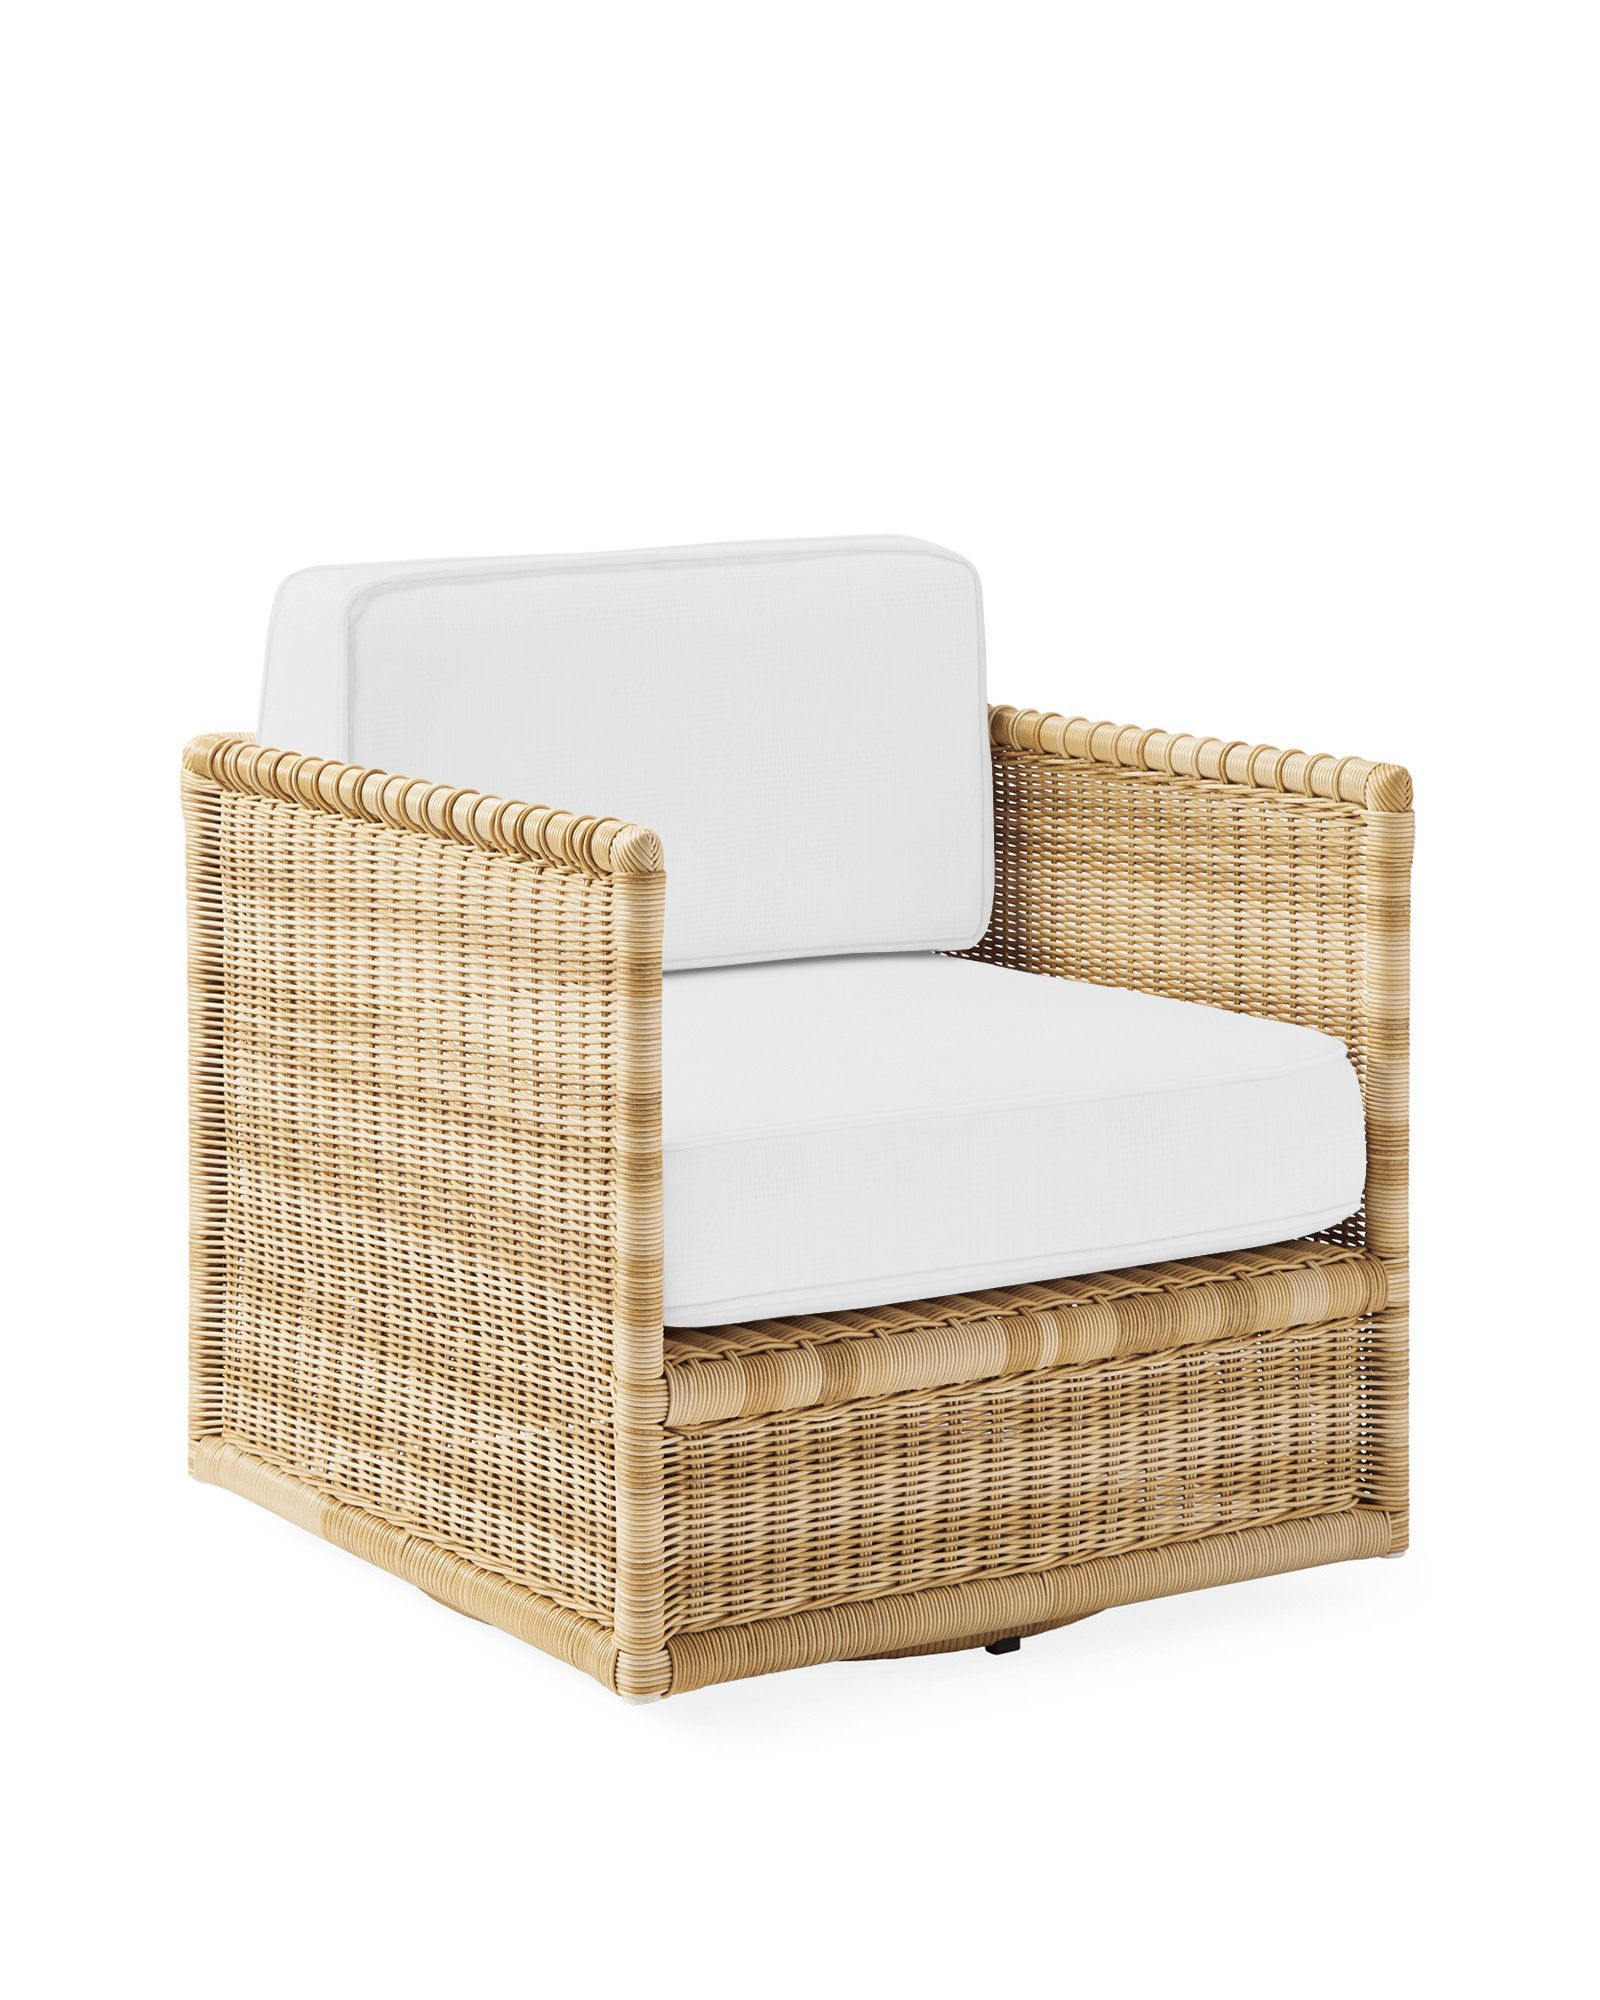 Pacifica Swivel Chair - Light Dune | Serena and Lily